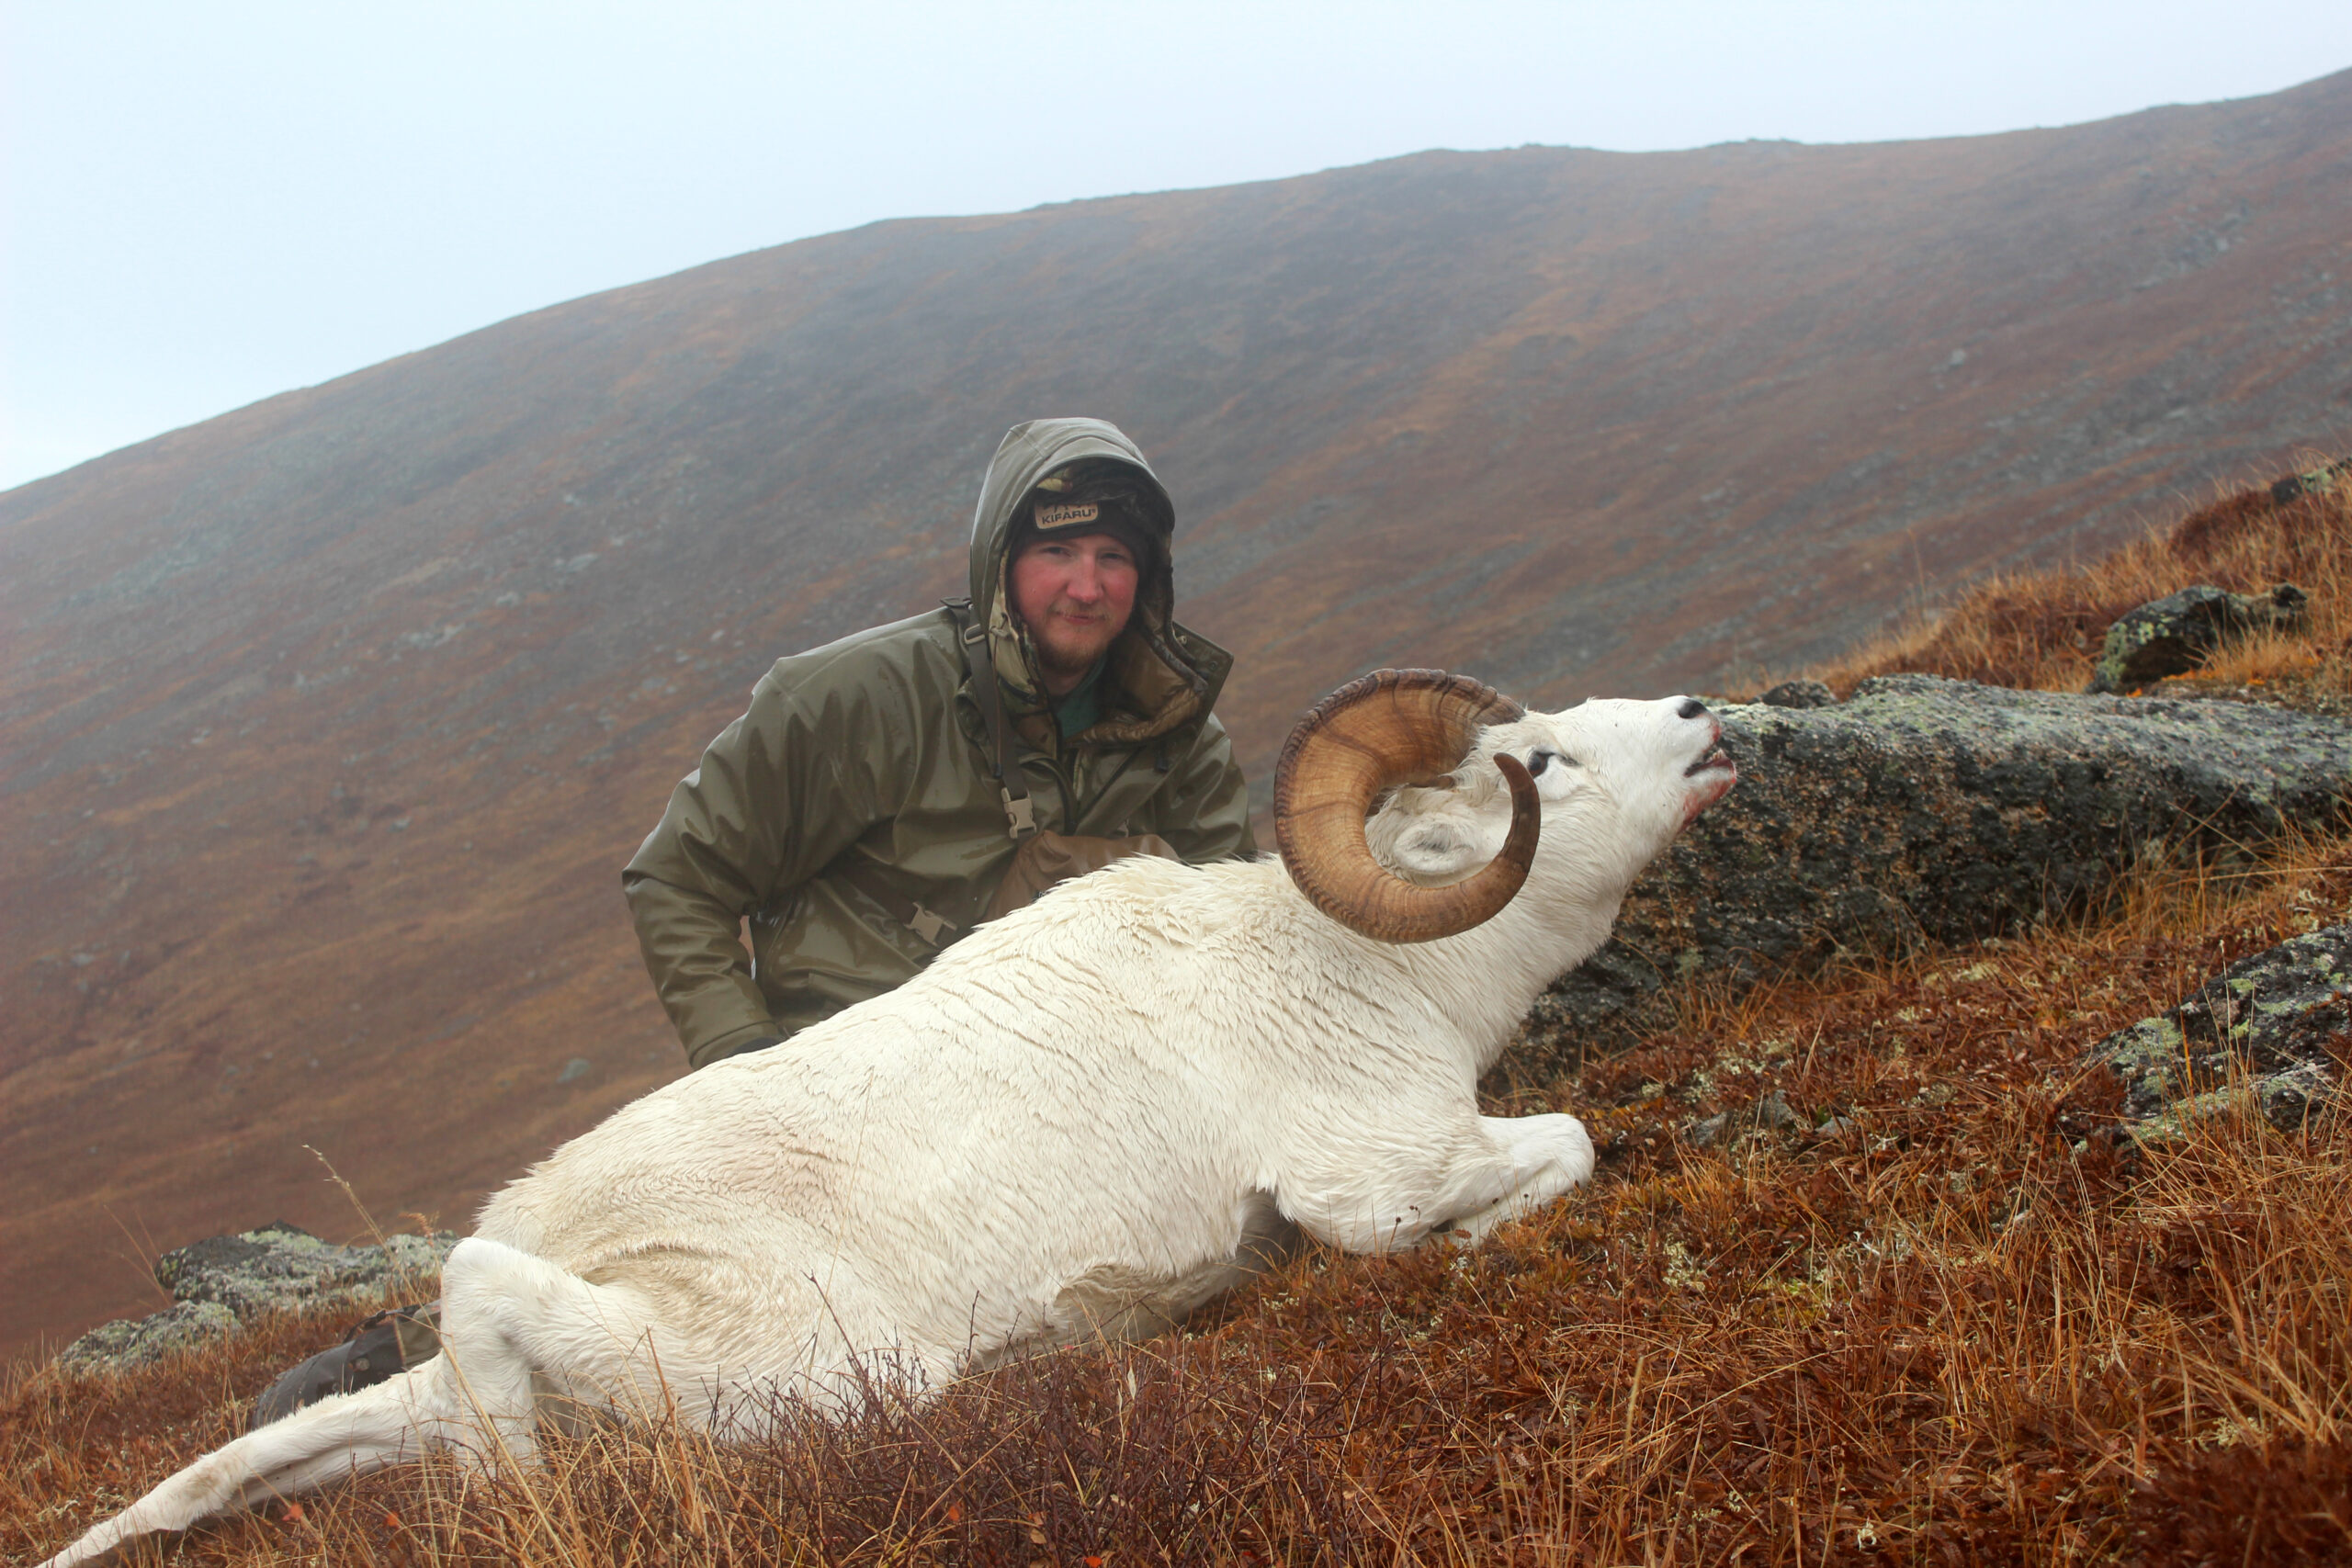 Sheep Hunting Looks Glamorous, But It Mostly Involves Soggy Gear, Chafing, and B.O.